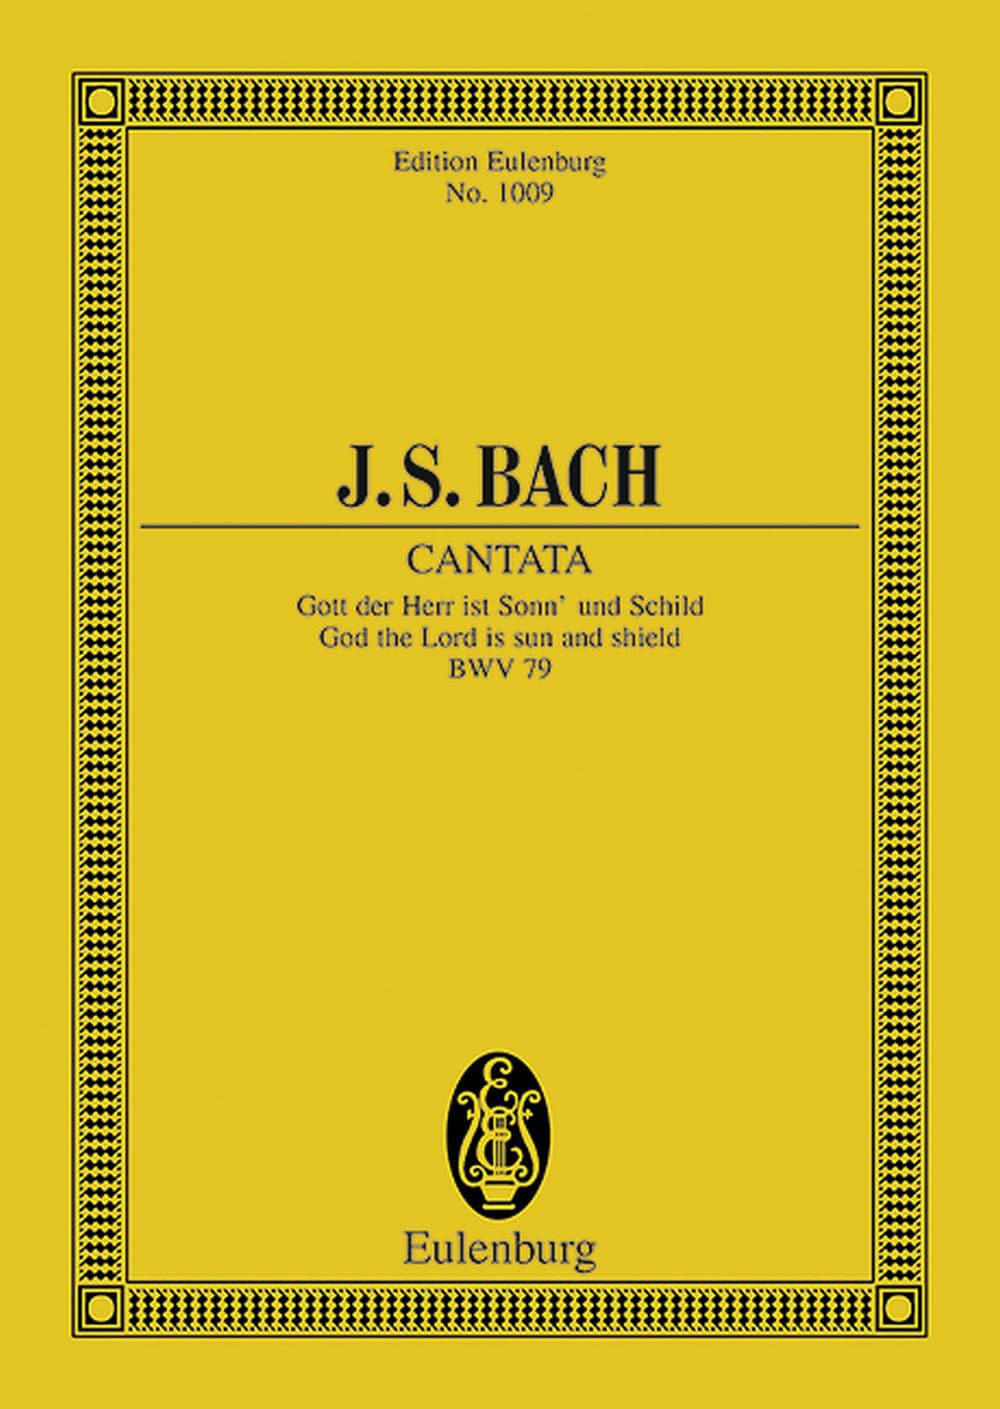 EULENBURG BACH J.S. - CANTATA NO.79 (FESTO REFORMATIONIS) BWV 79 - 3 SOLO PARTS, CHOIR AND CHAMBER ORCHESTRA